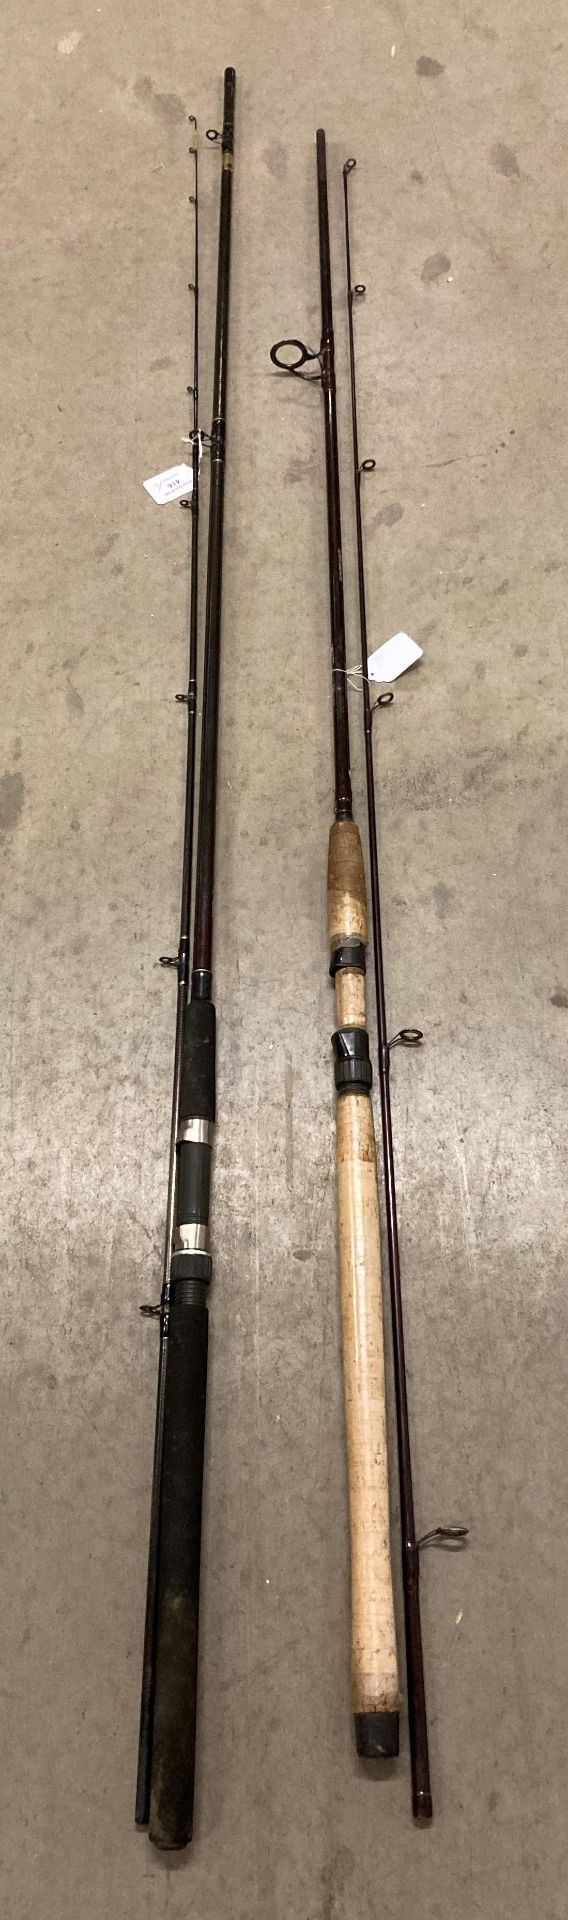 Two fishing rods by DAM - Fighter CF Picker 3m carbon 2-piece and a Shimano Stradic Super Graphite